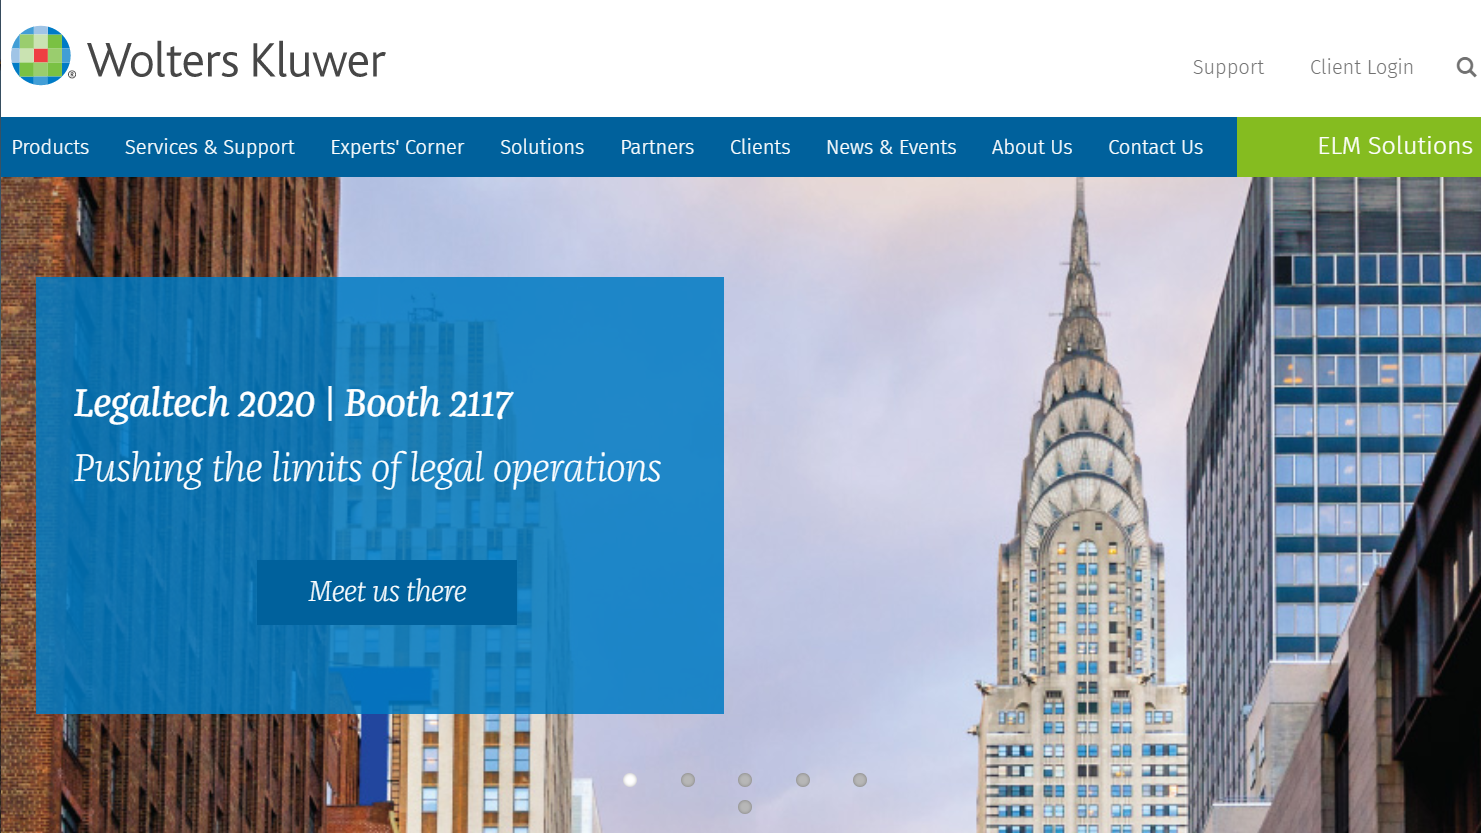 Wolters Kluwer&#8217;s ELM Solutions Introduces AI-Powered Tool for Legal Bill Review #Legalweek20